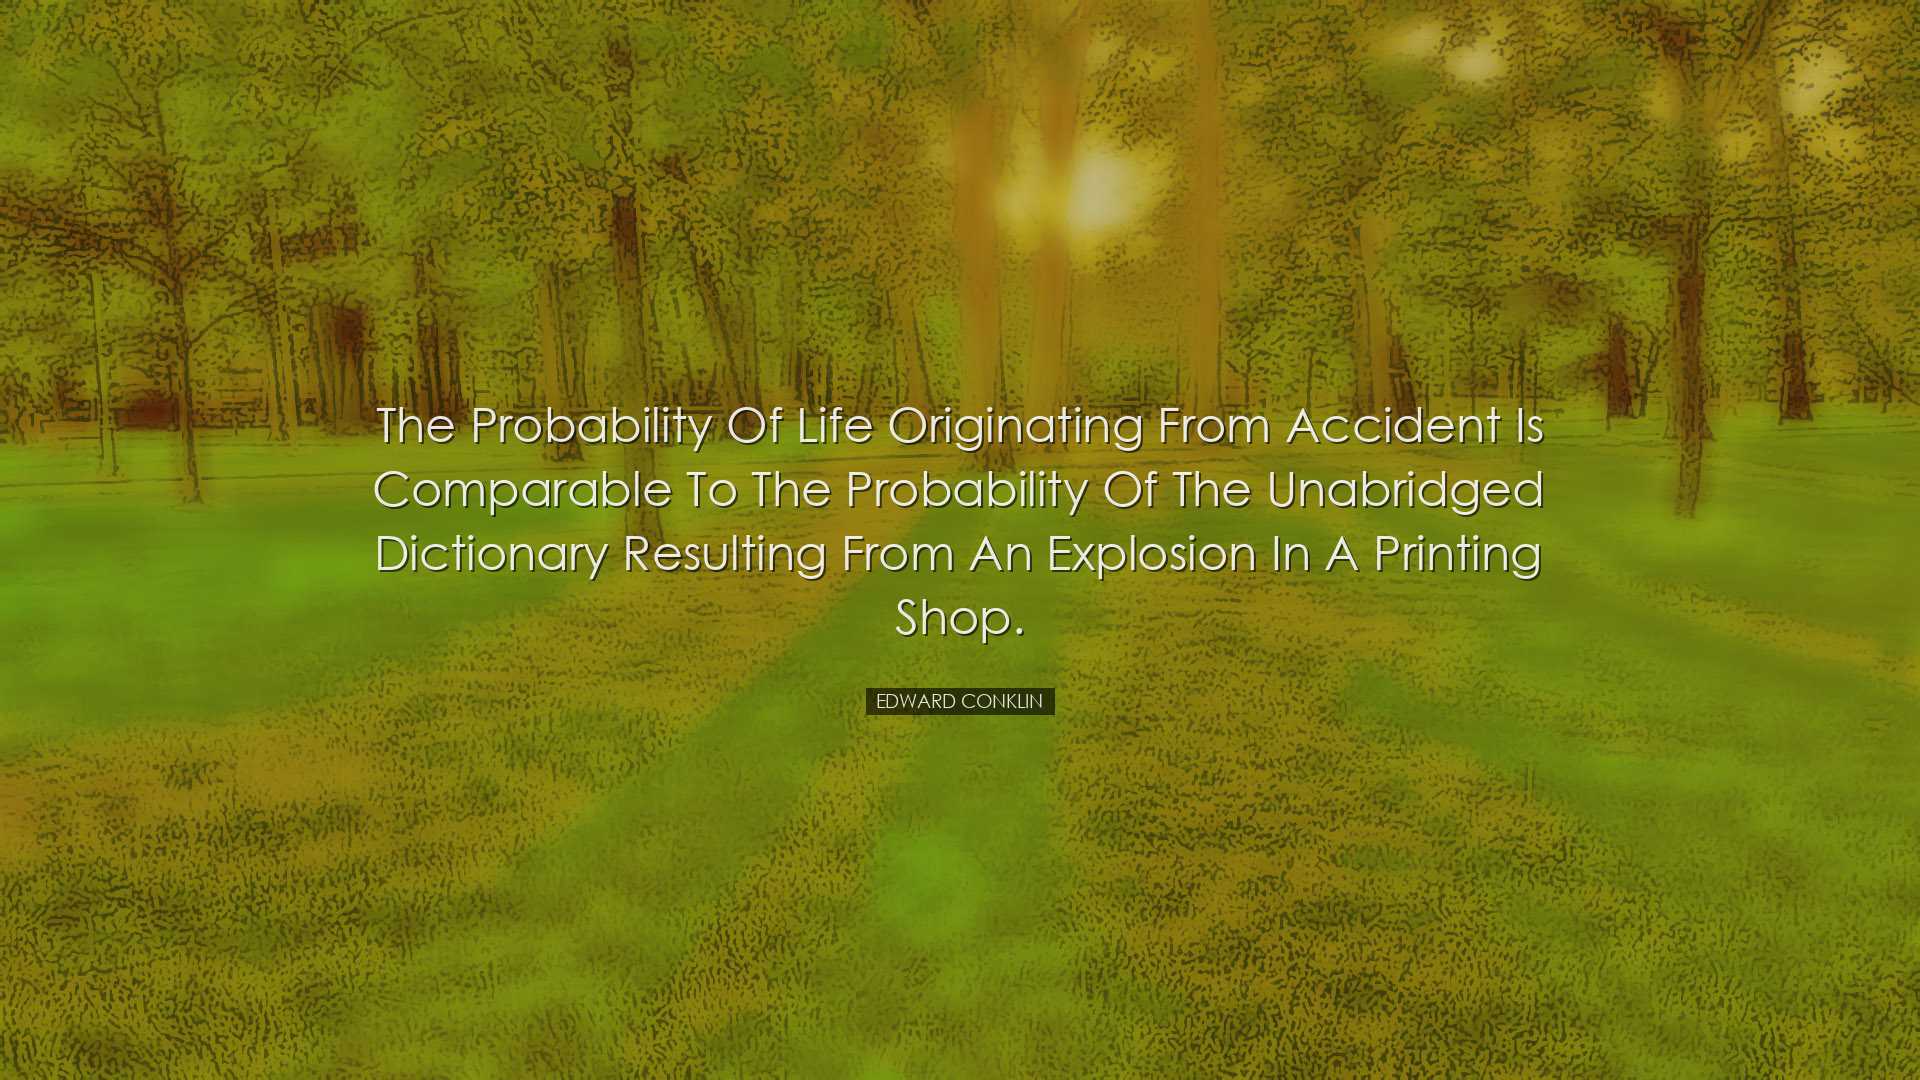 The probability of life originating from accident is comparable to